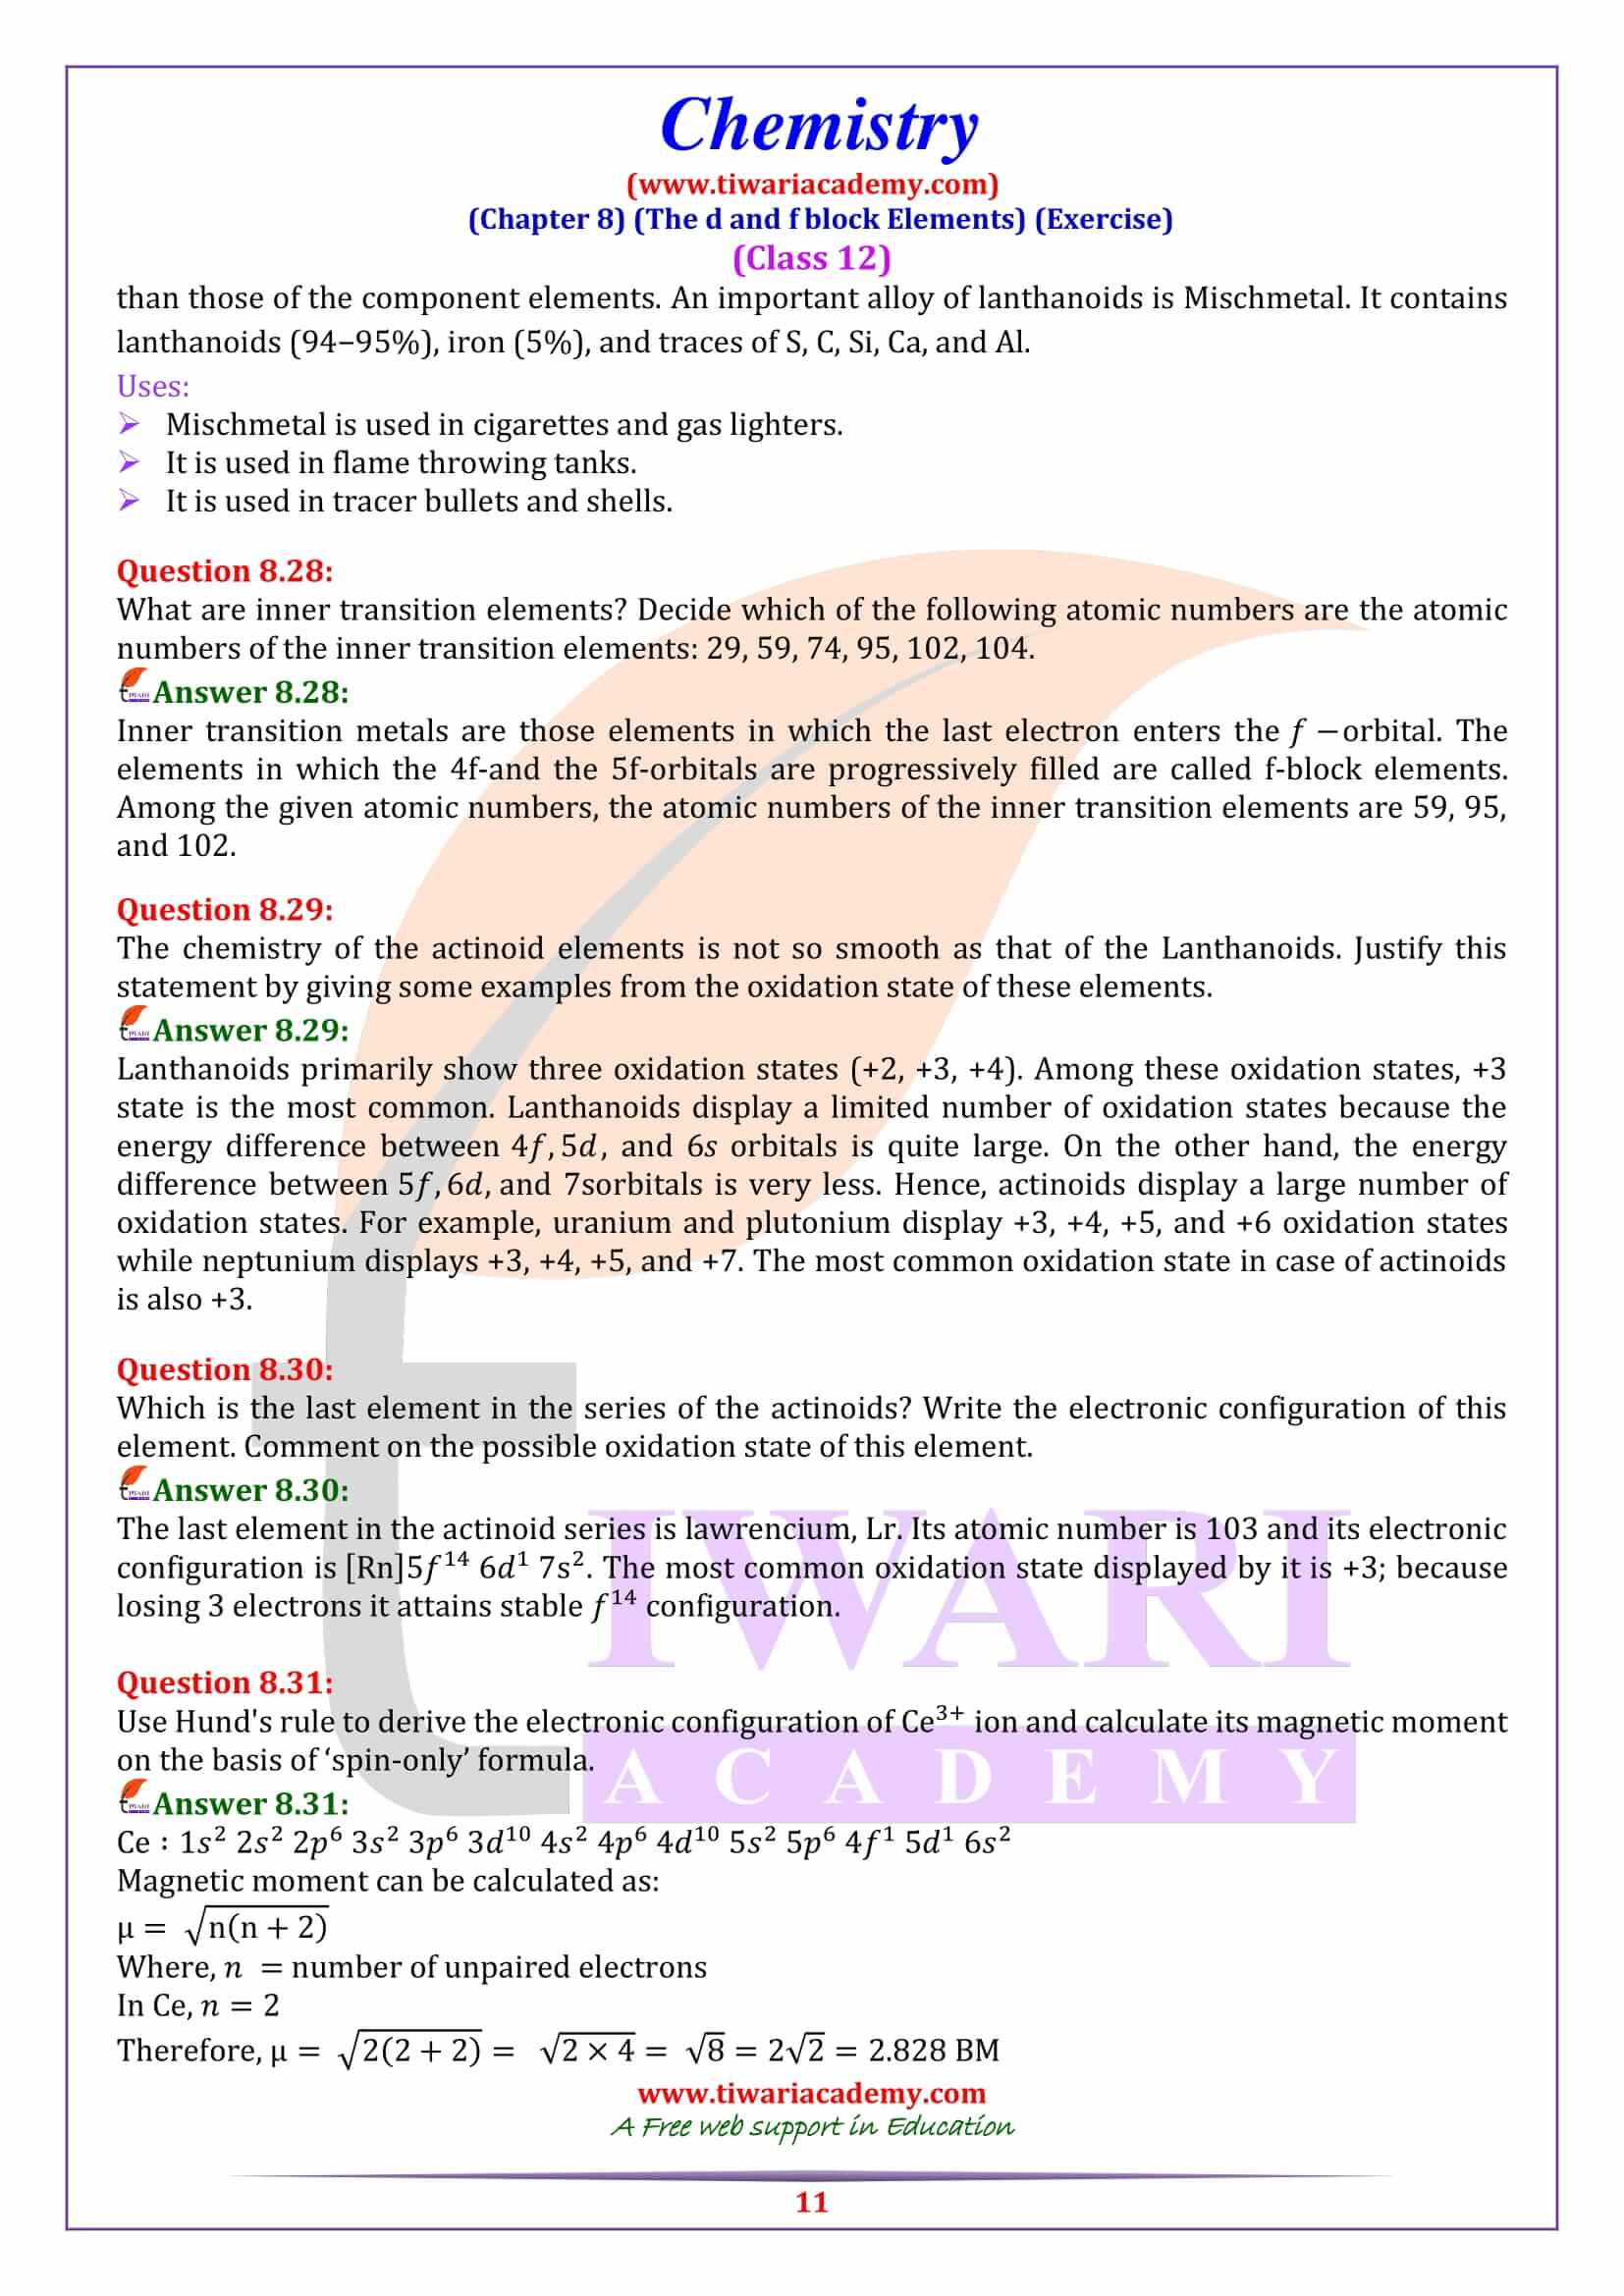 NCERT Solutions for Class 12 Chemistry Chapter 8 guide